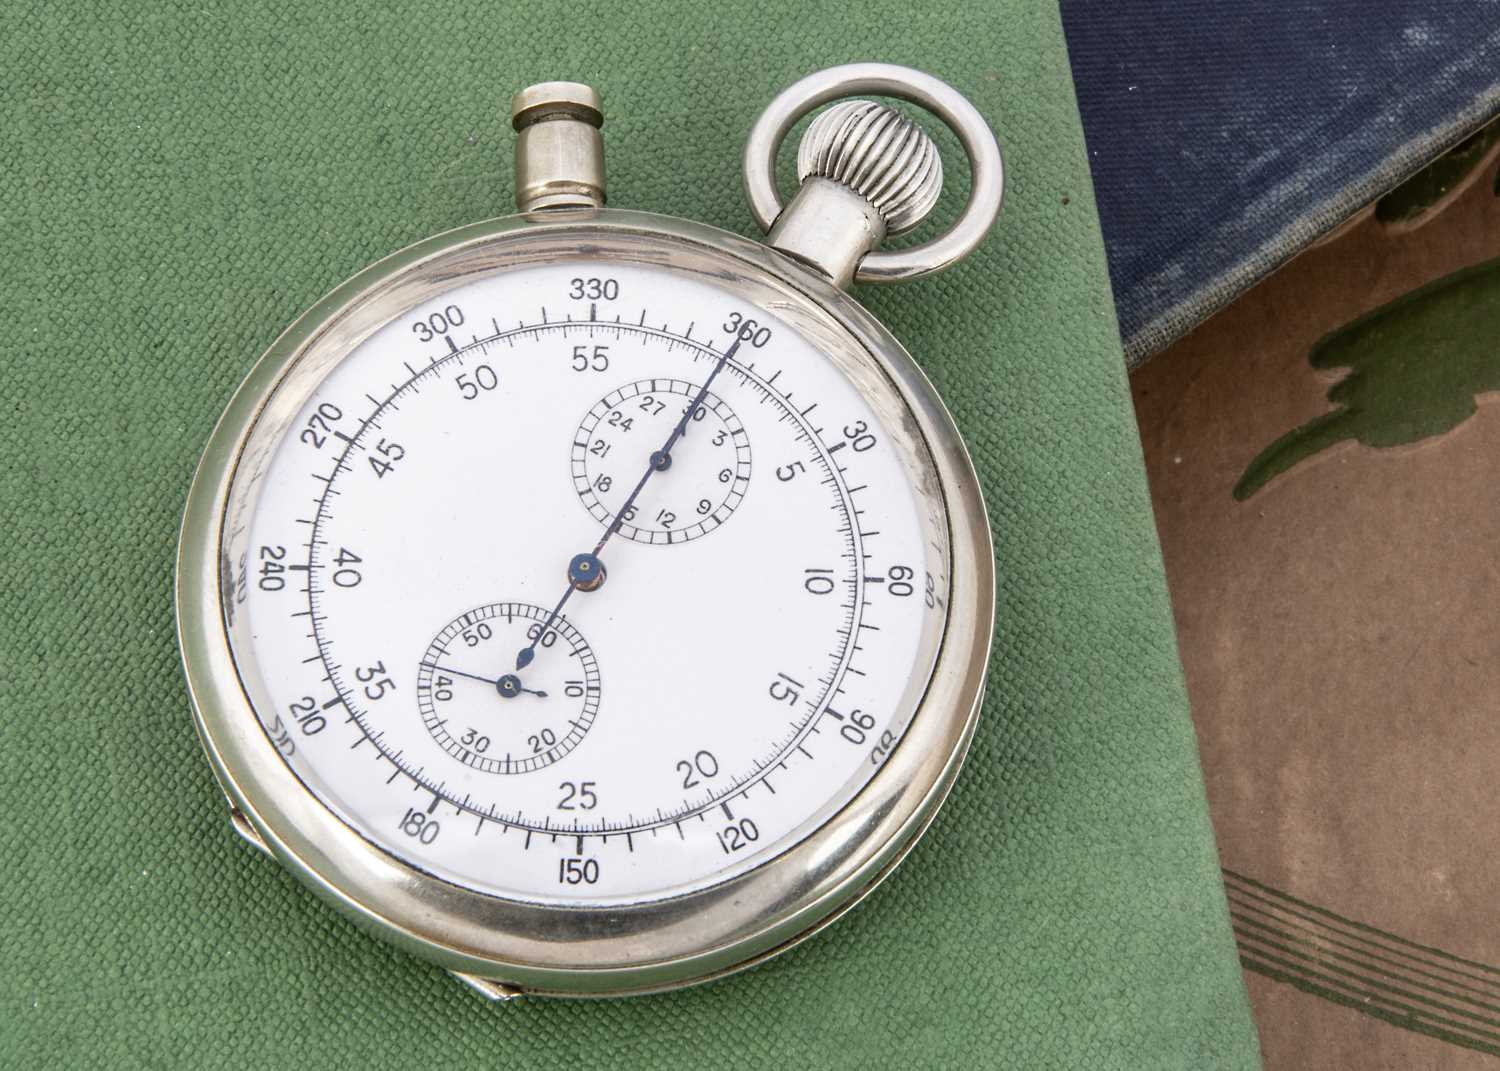 A British military issue stopwatch,